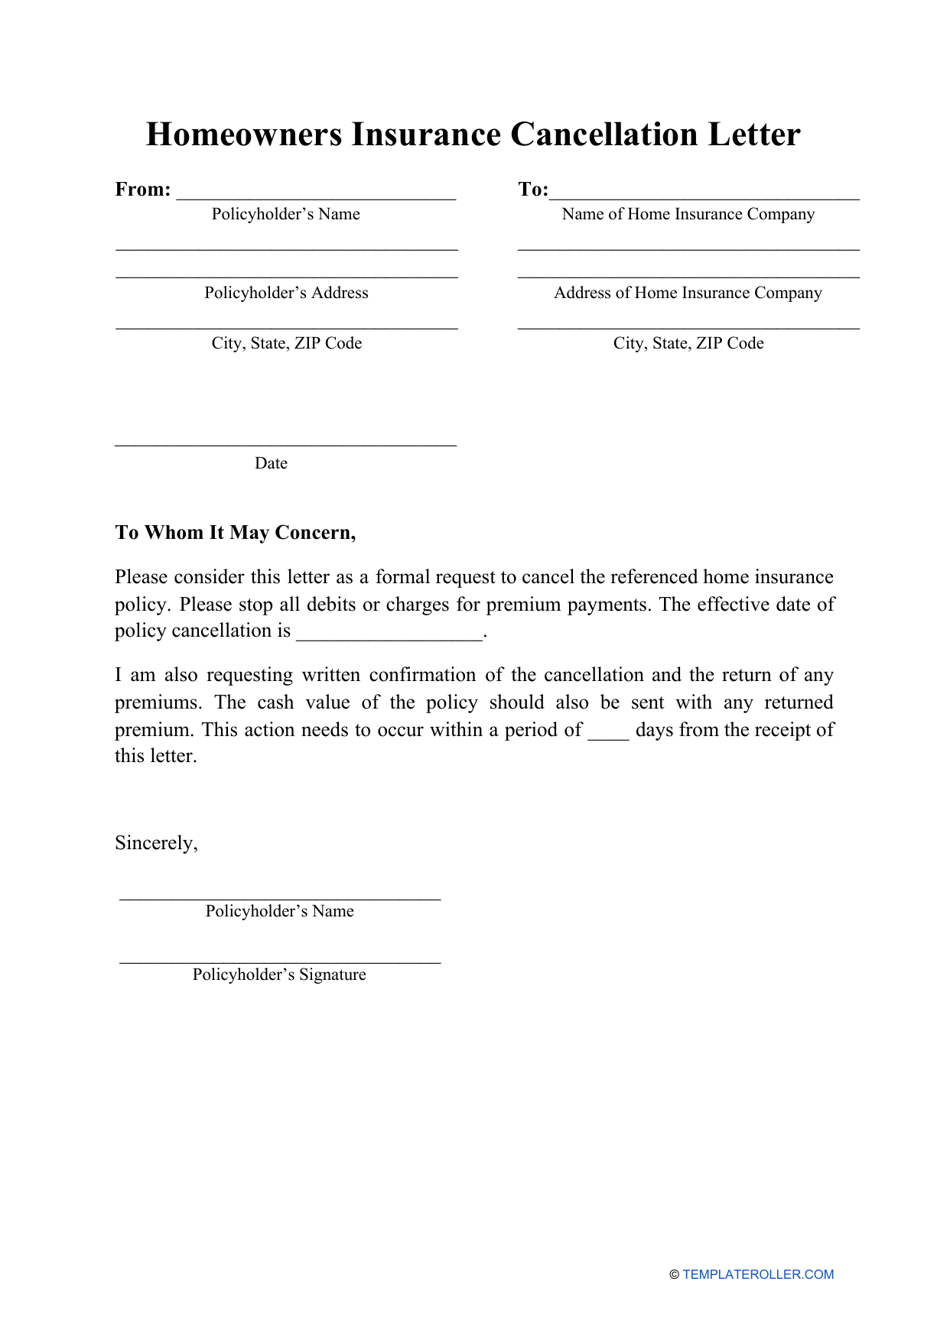 Homeowners Insurance Cancellation Letter Template Download Printable